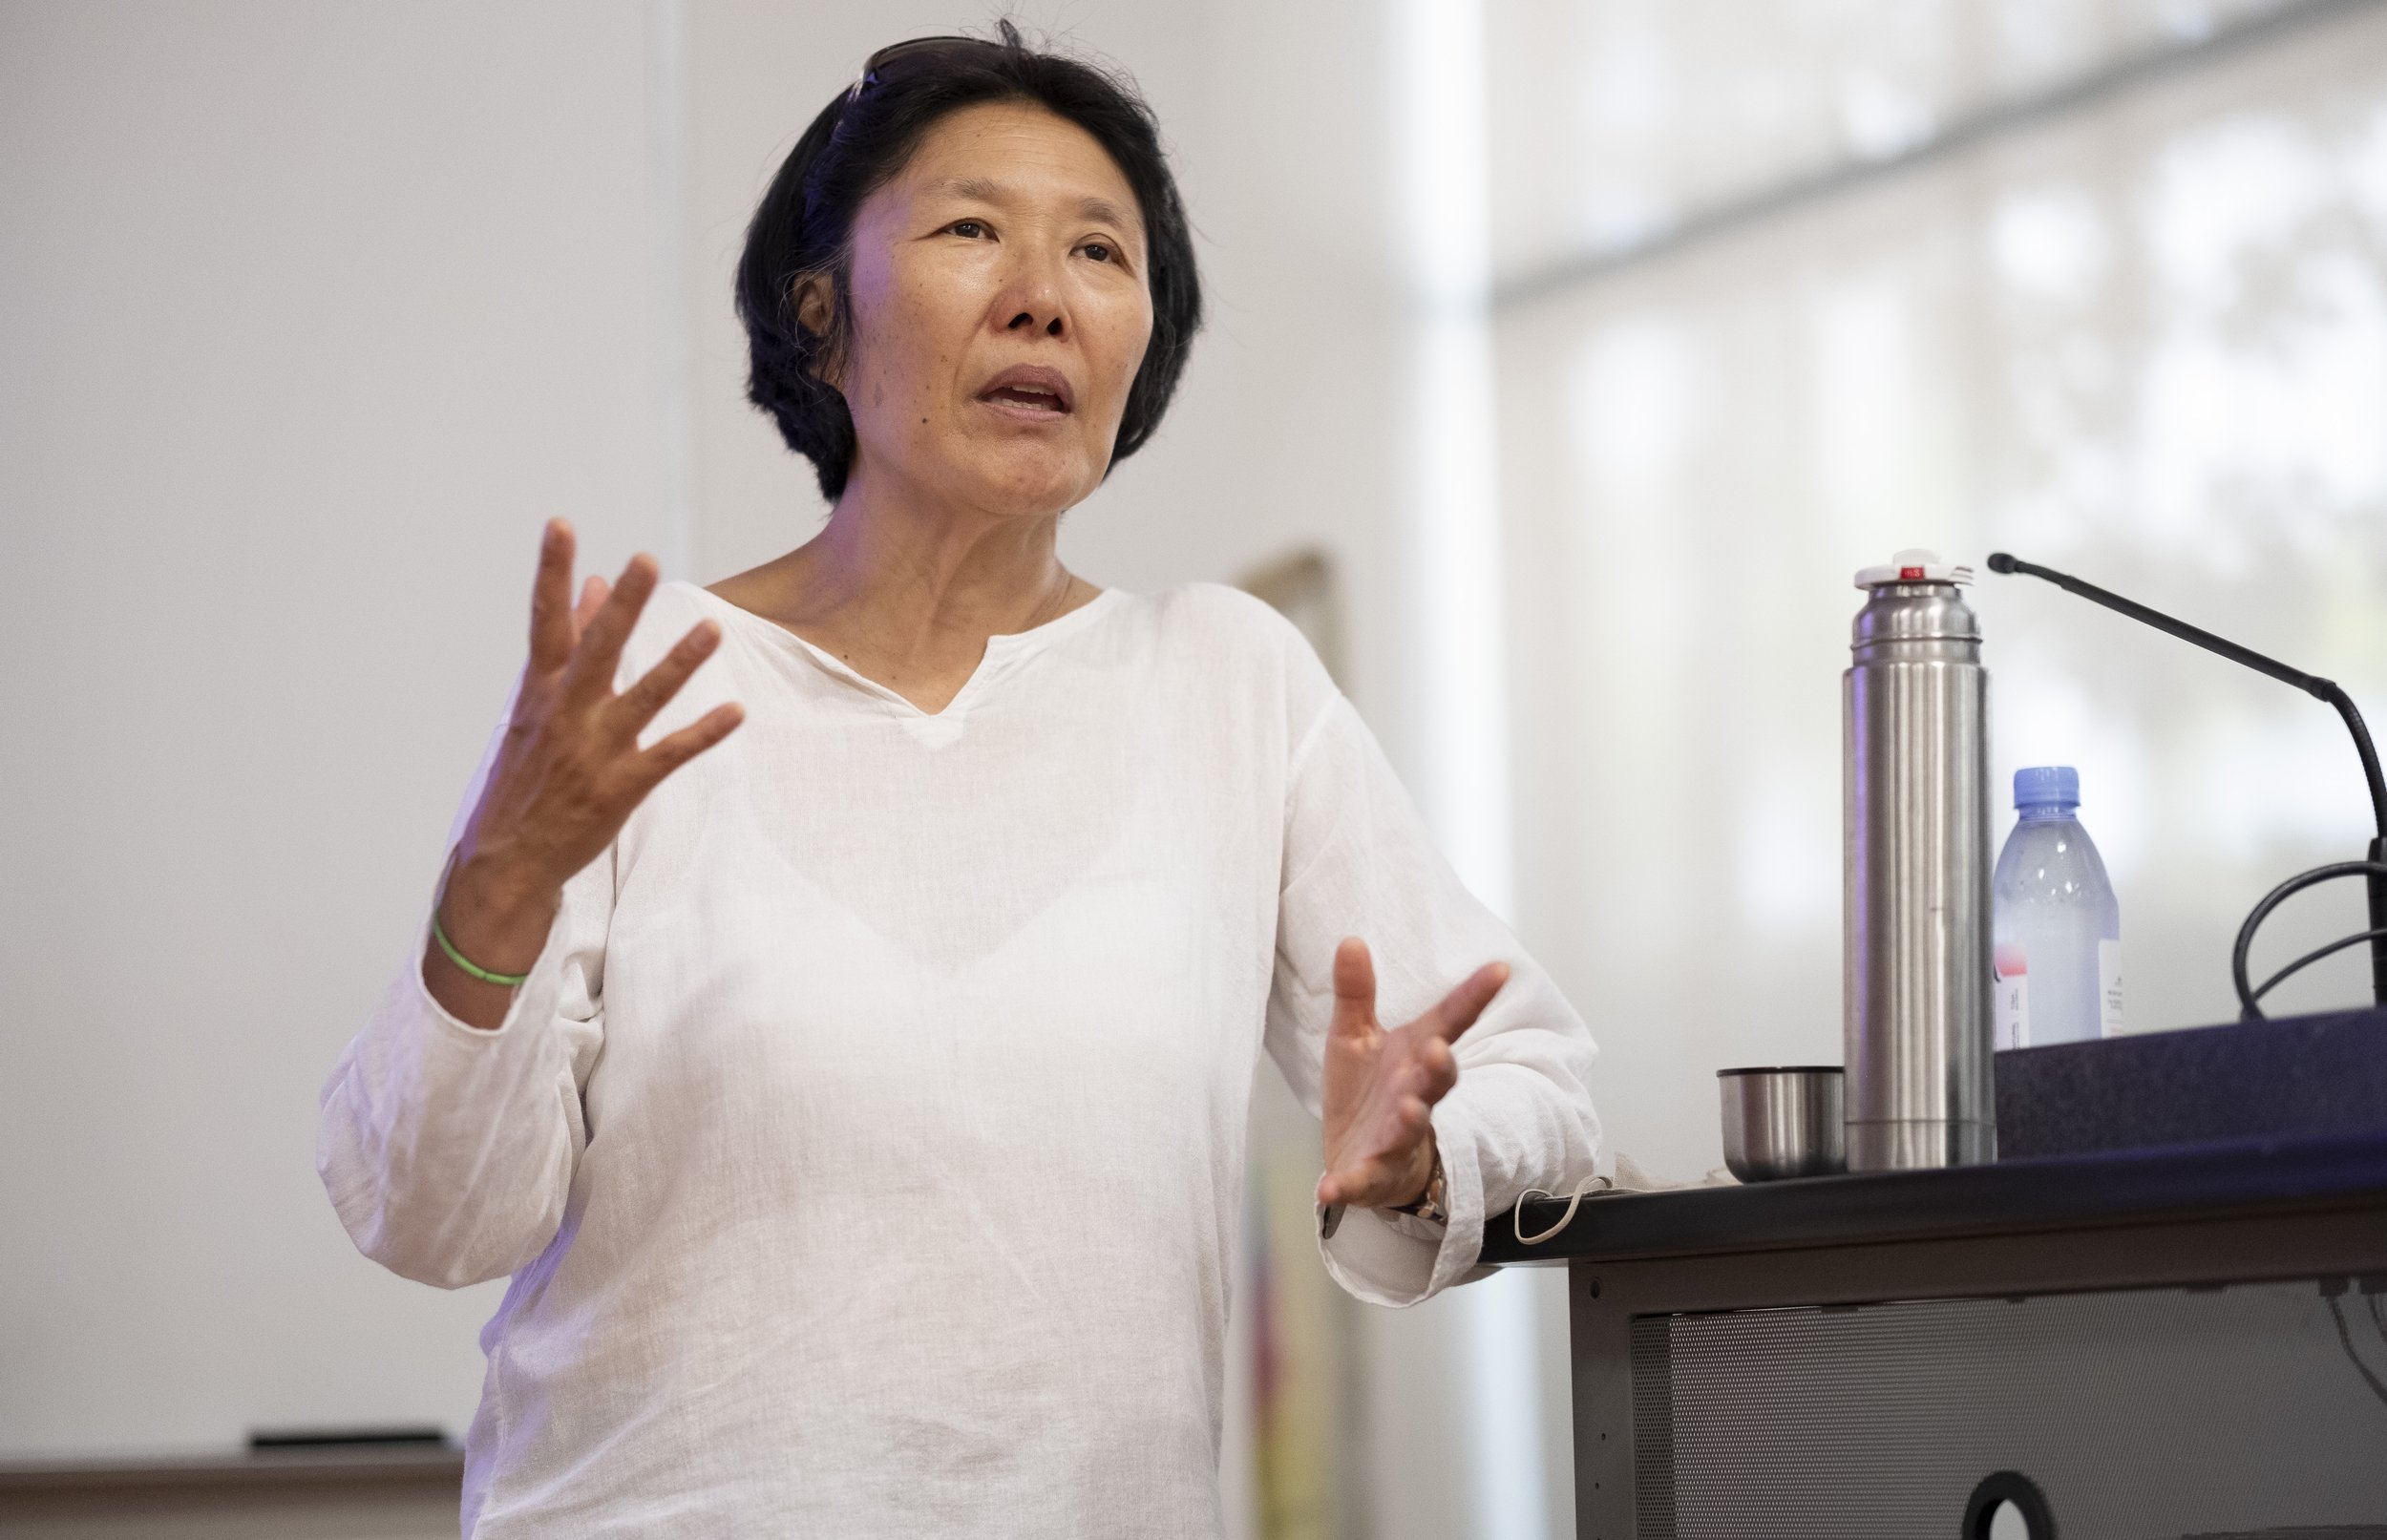  Documentary filmmaker Ann Ann Kaneko answers audience questions in the Humanities & Social Science building at Santa Monica College after screening her film, “Manzanar, Diverted: When Water Becomes Dust” to faculty and students. Thurs. Sept. 14, 202